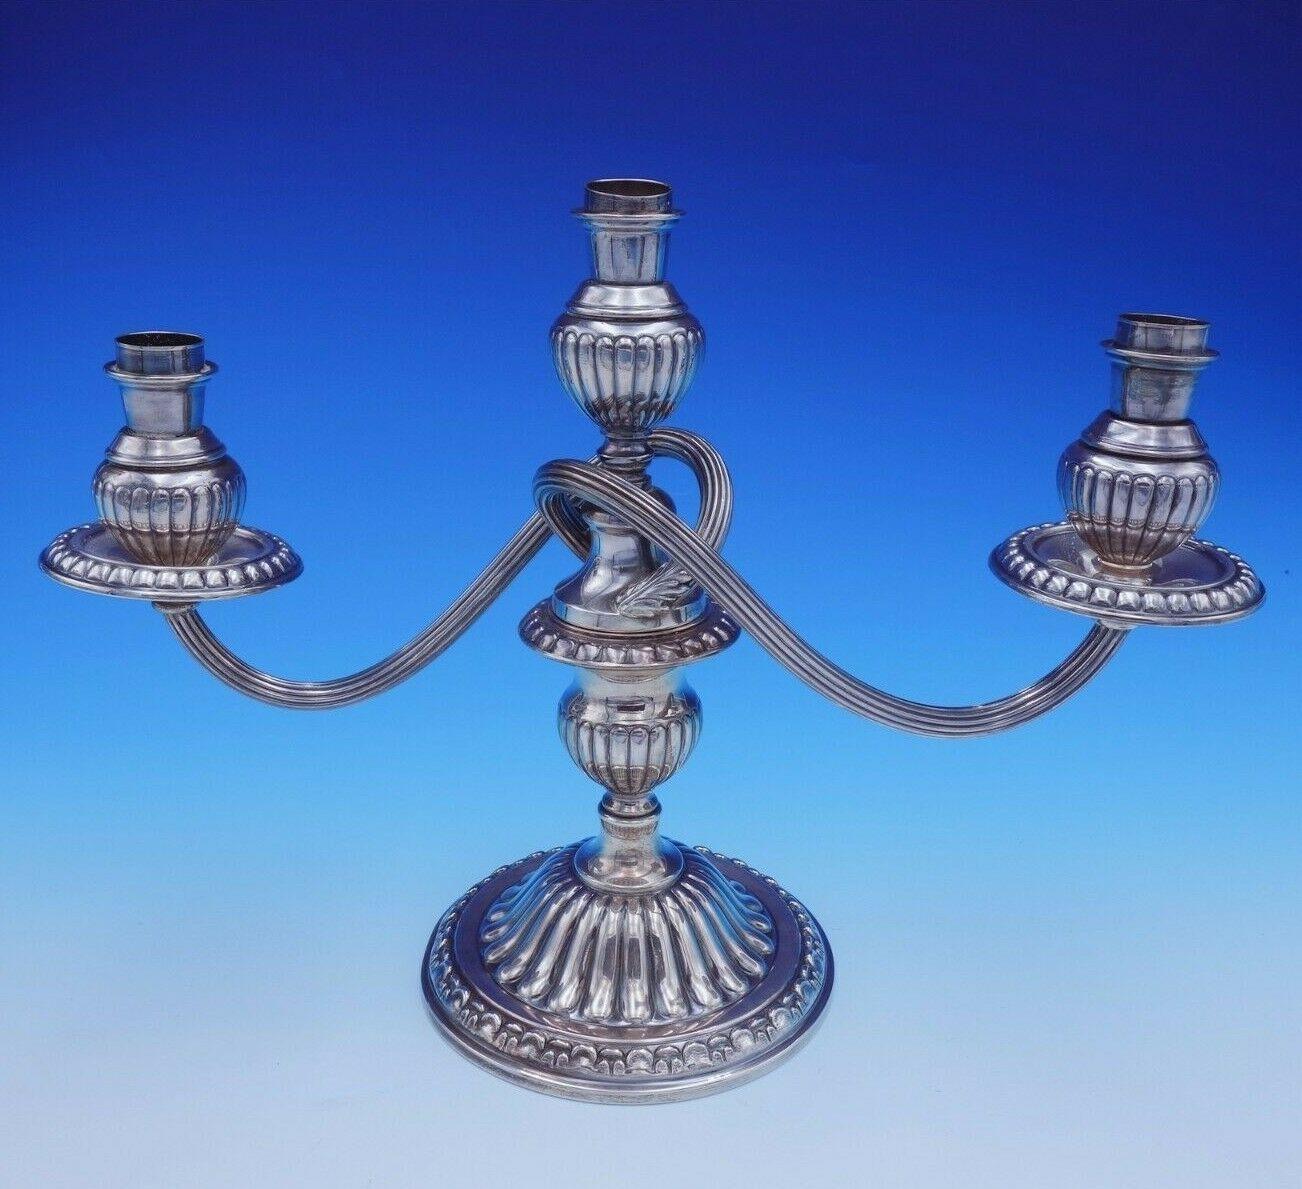 Imperial by Camusso

Beautiful imperial by Camusso sterling silver pair of 3-light candelabras with a lovely scalloped design. The pieces measure 9 3/4